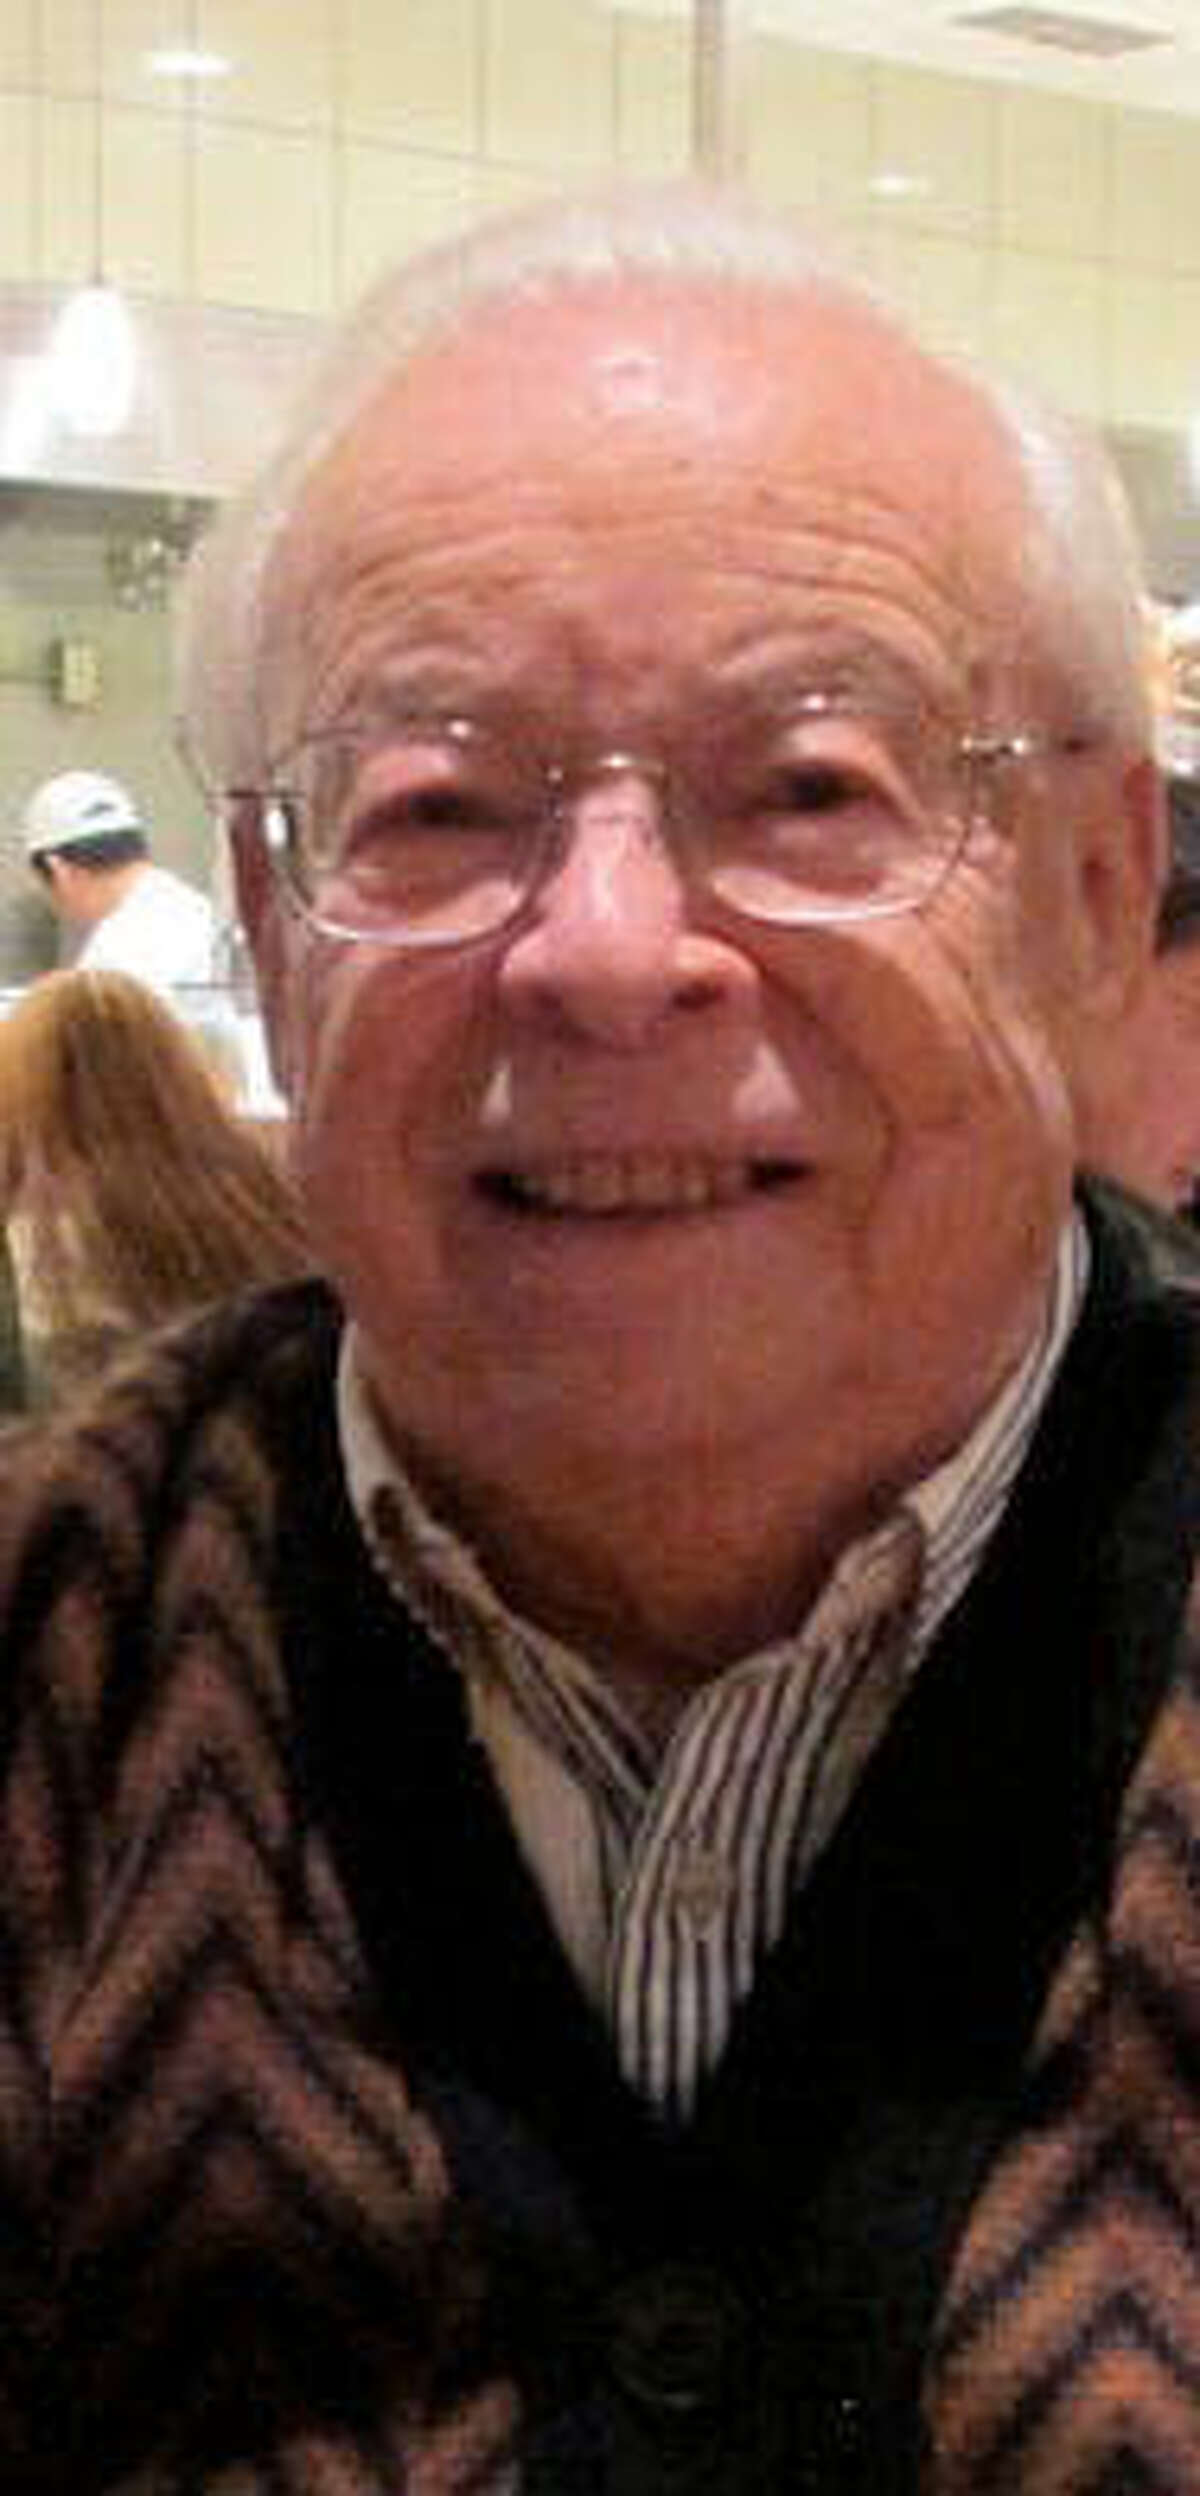 Former pari-mutuel examiner for the New York Department of Taxation and Finance, Isaac "Ike" Harkaway in retirement in 2011. (Courtesy of Cary Harkaway)